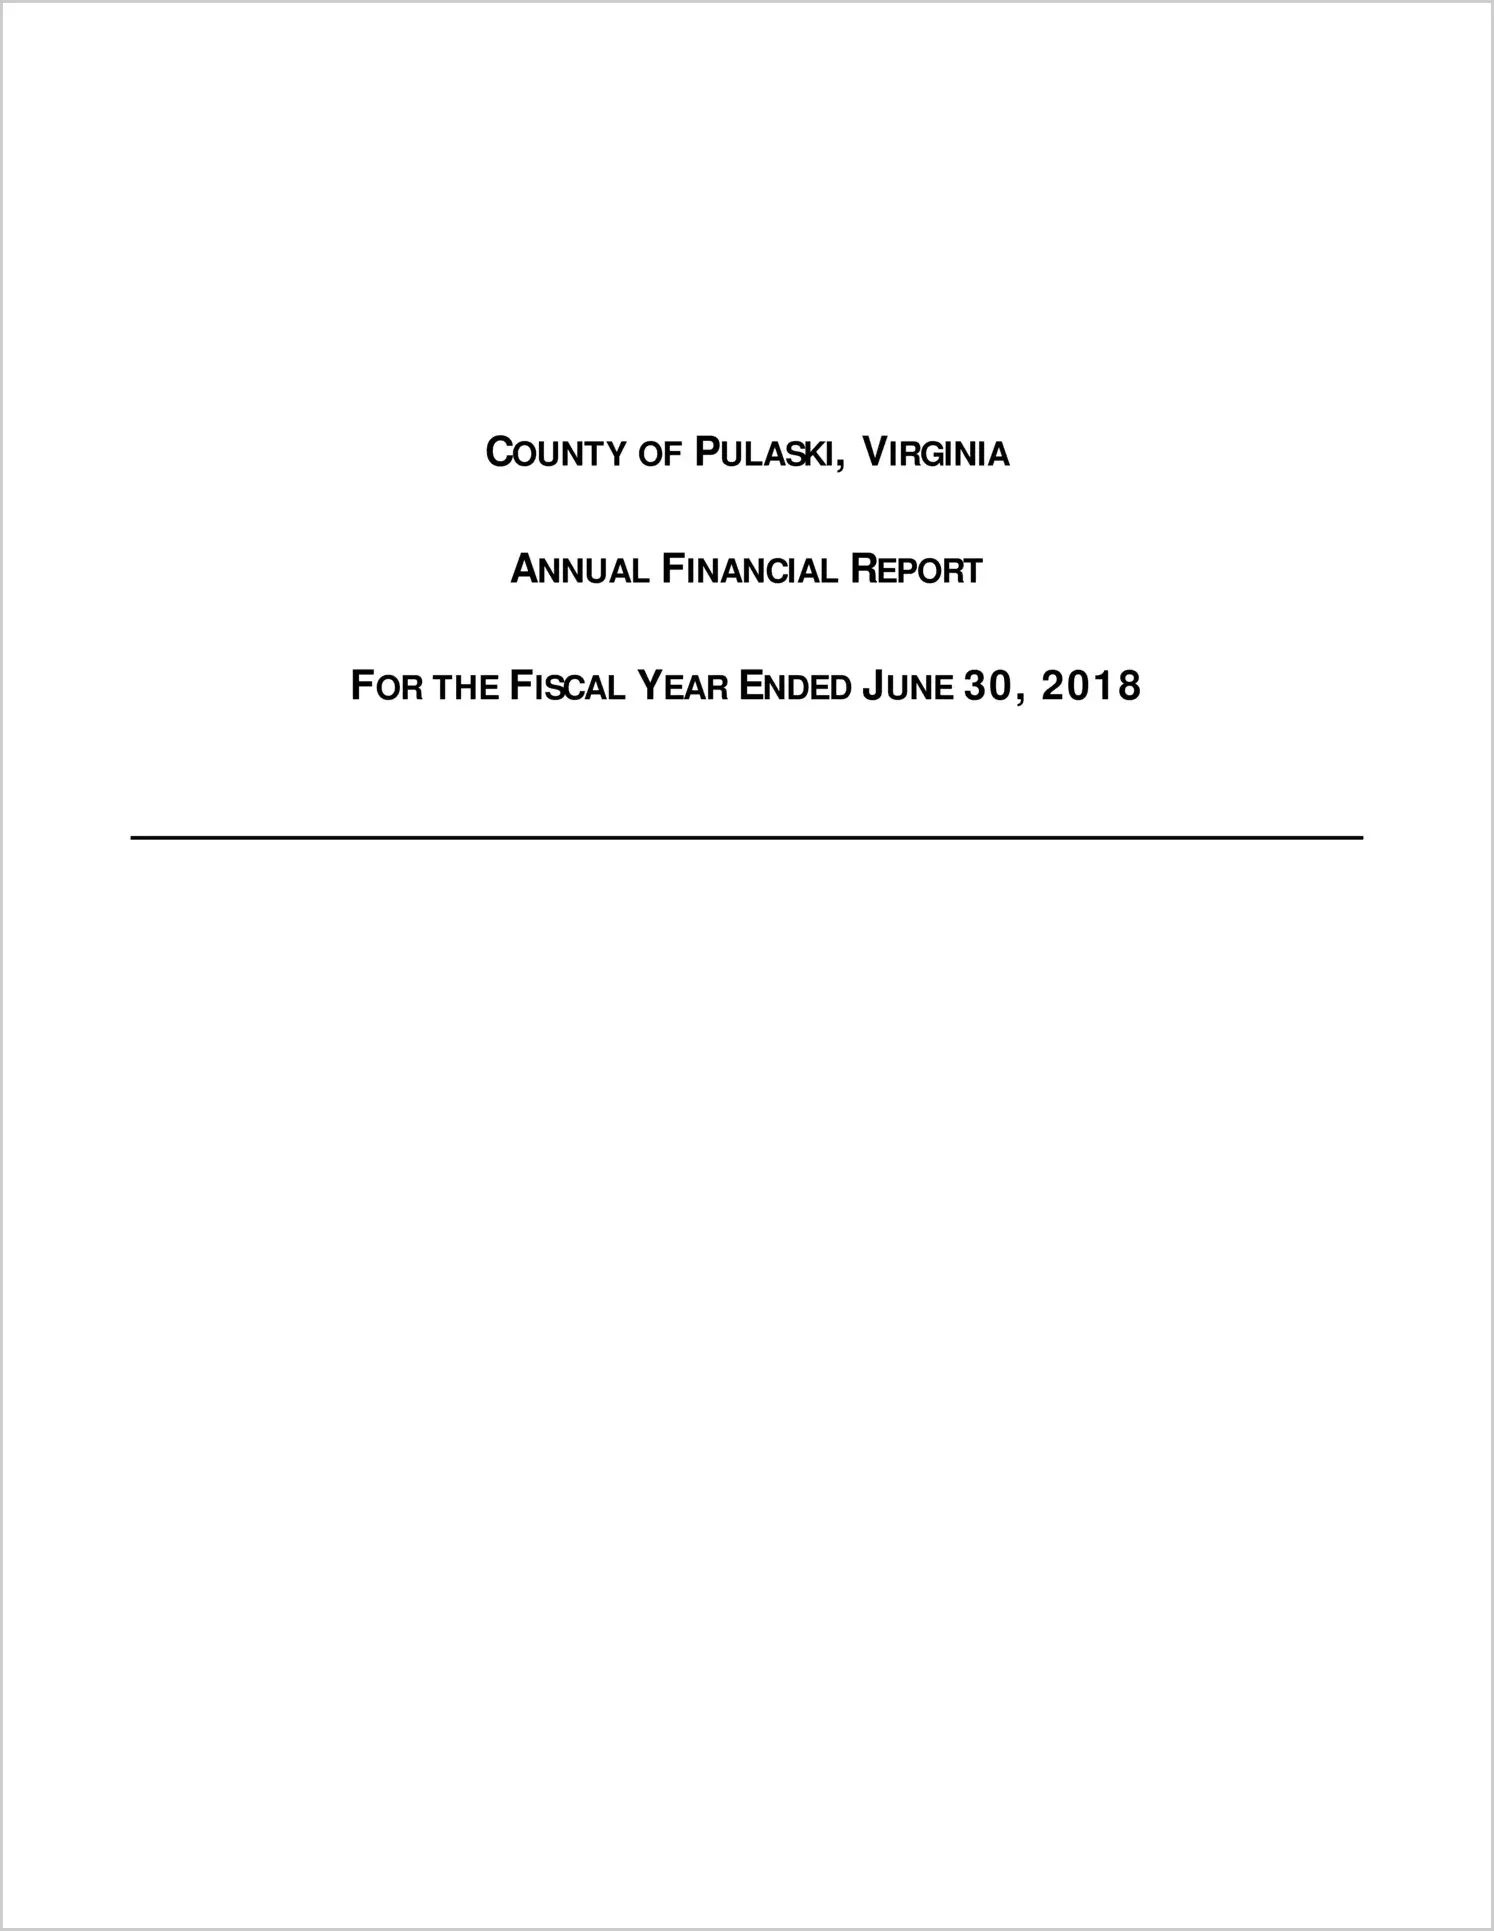 2018 Annual Financial Report for County of Pulaski